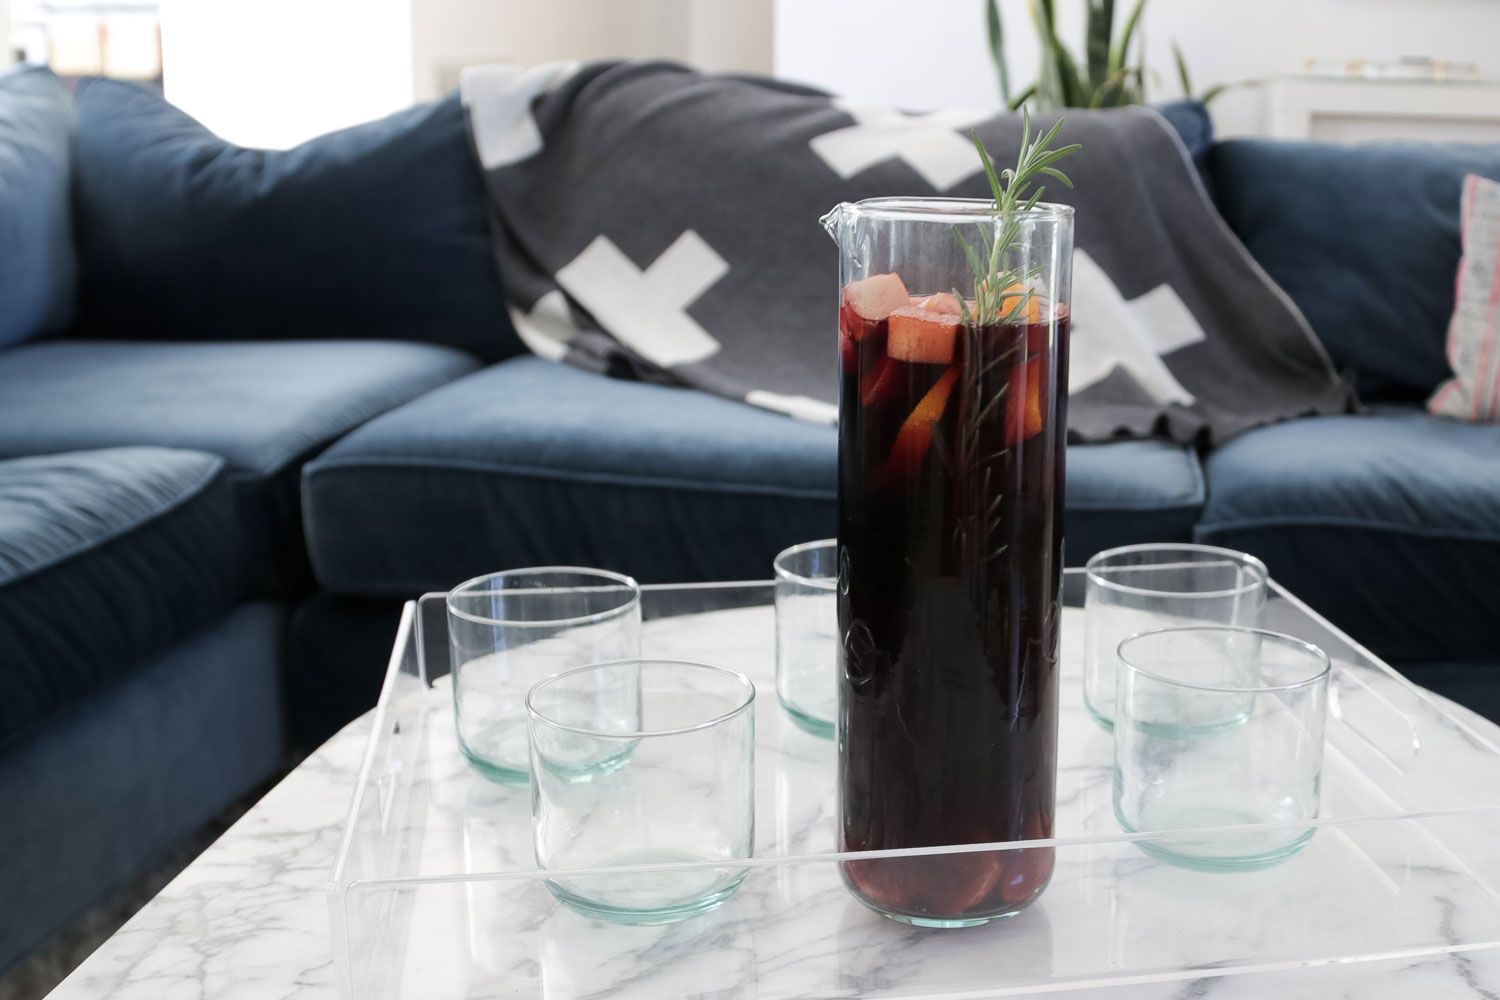 Newly drinking glasses, pitcher and blanket, all made from 100% recycled materials | Cool Mom Picks